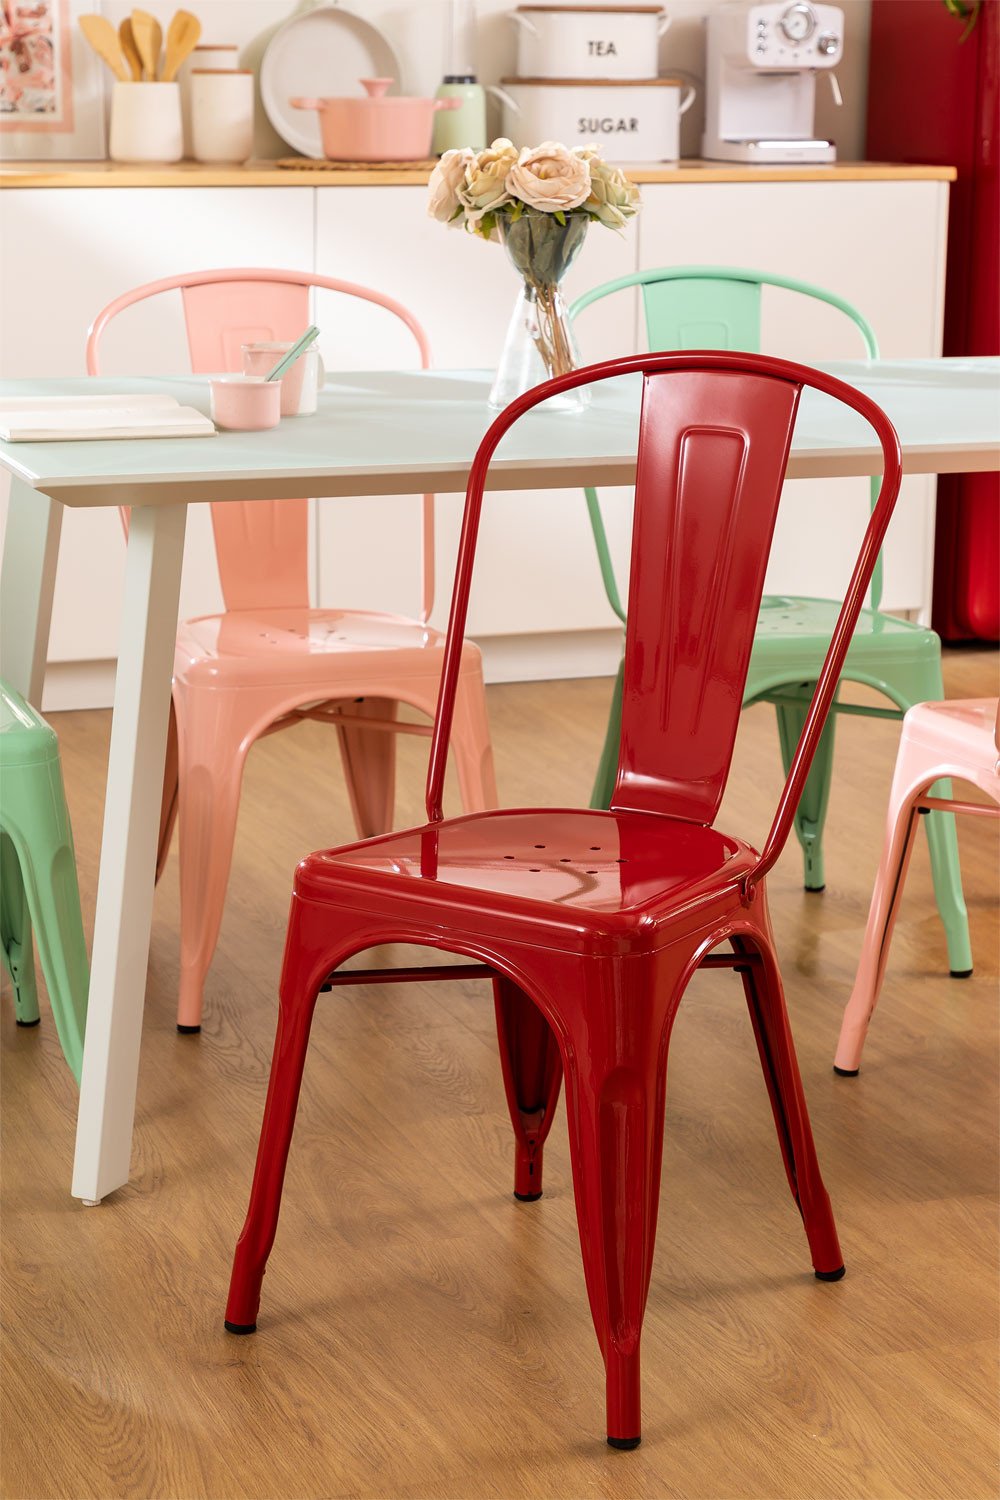 Pack of 4 Stackable Chairs LIX , gallery image 1